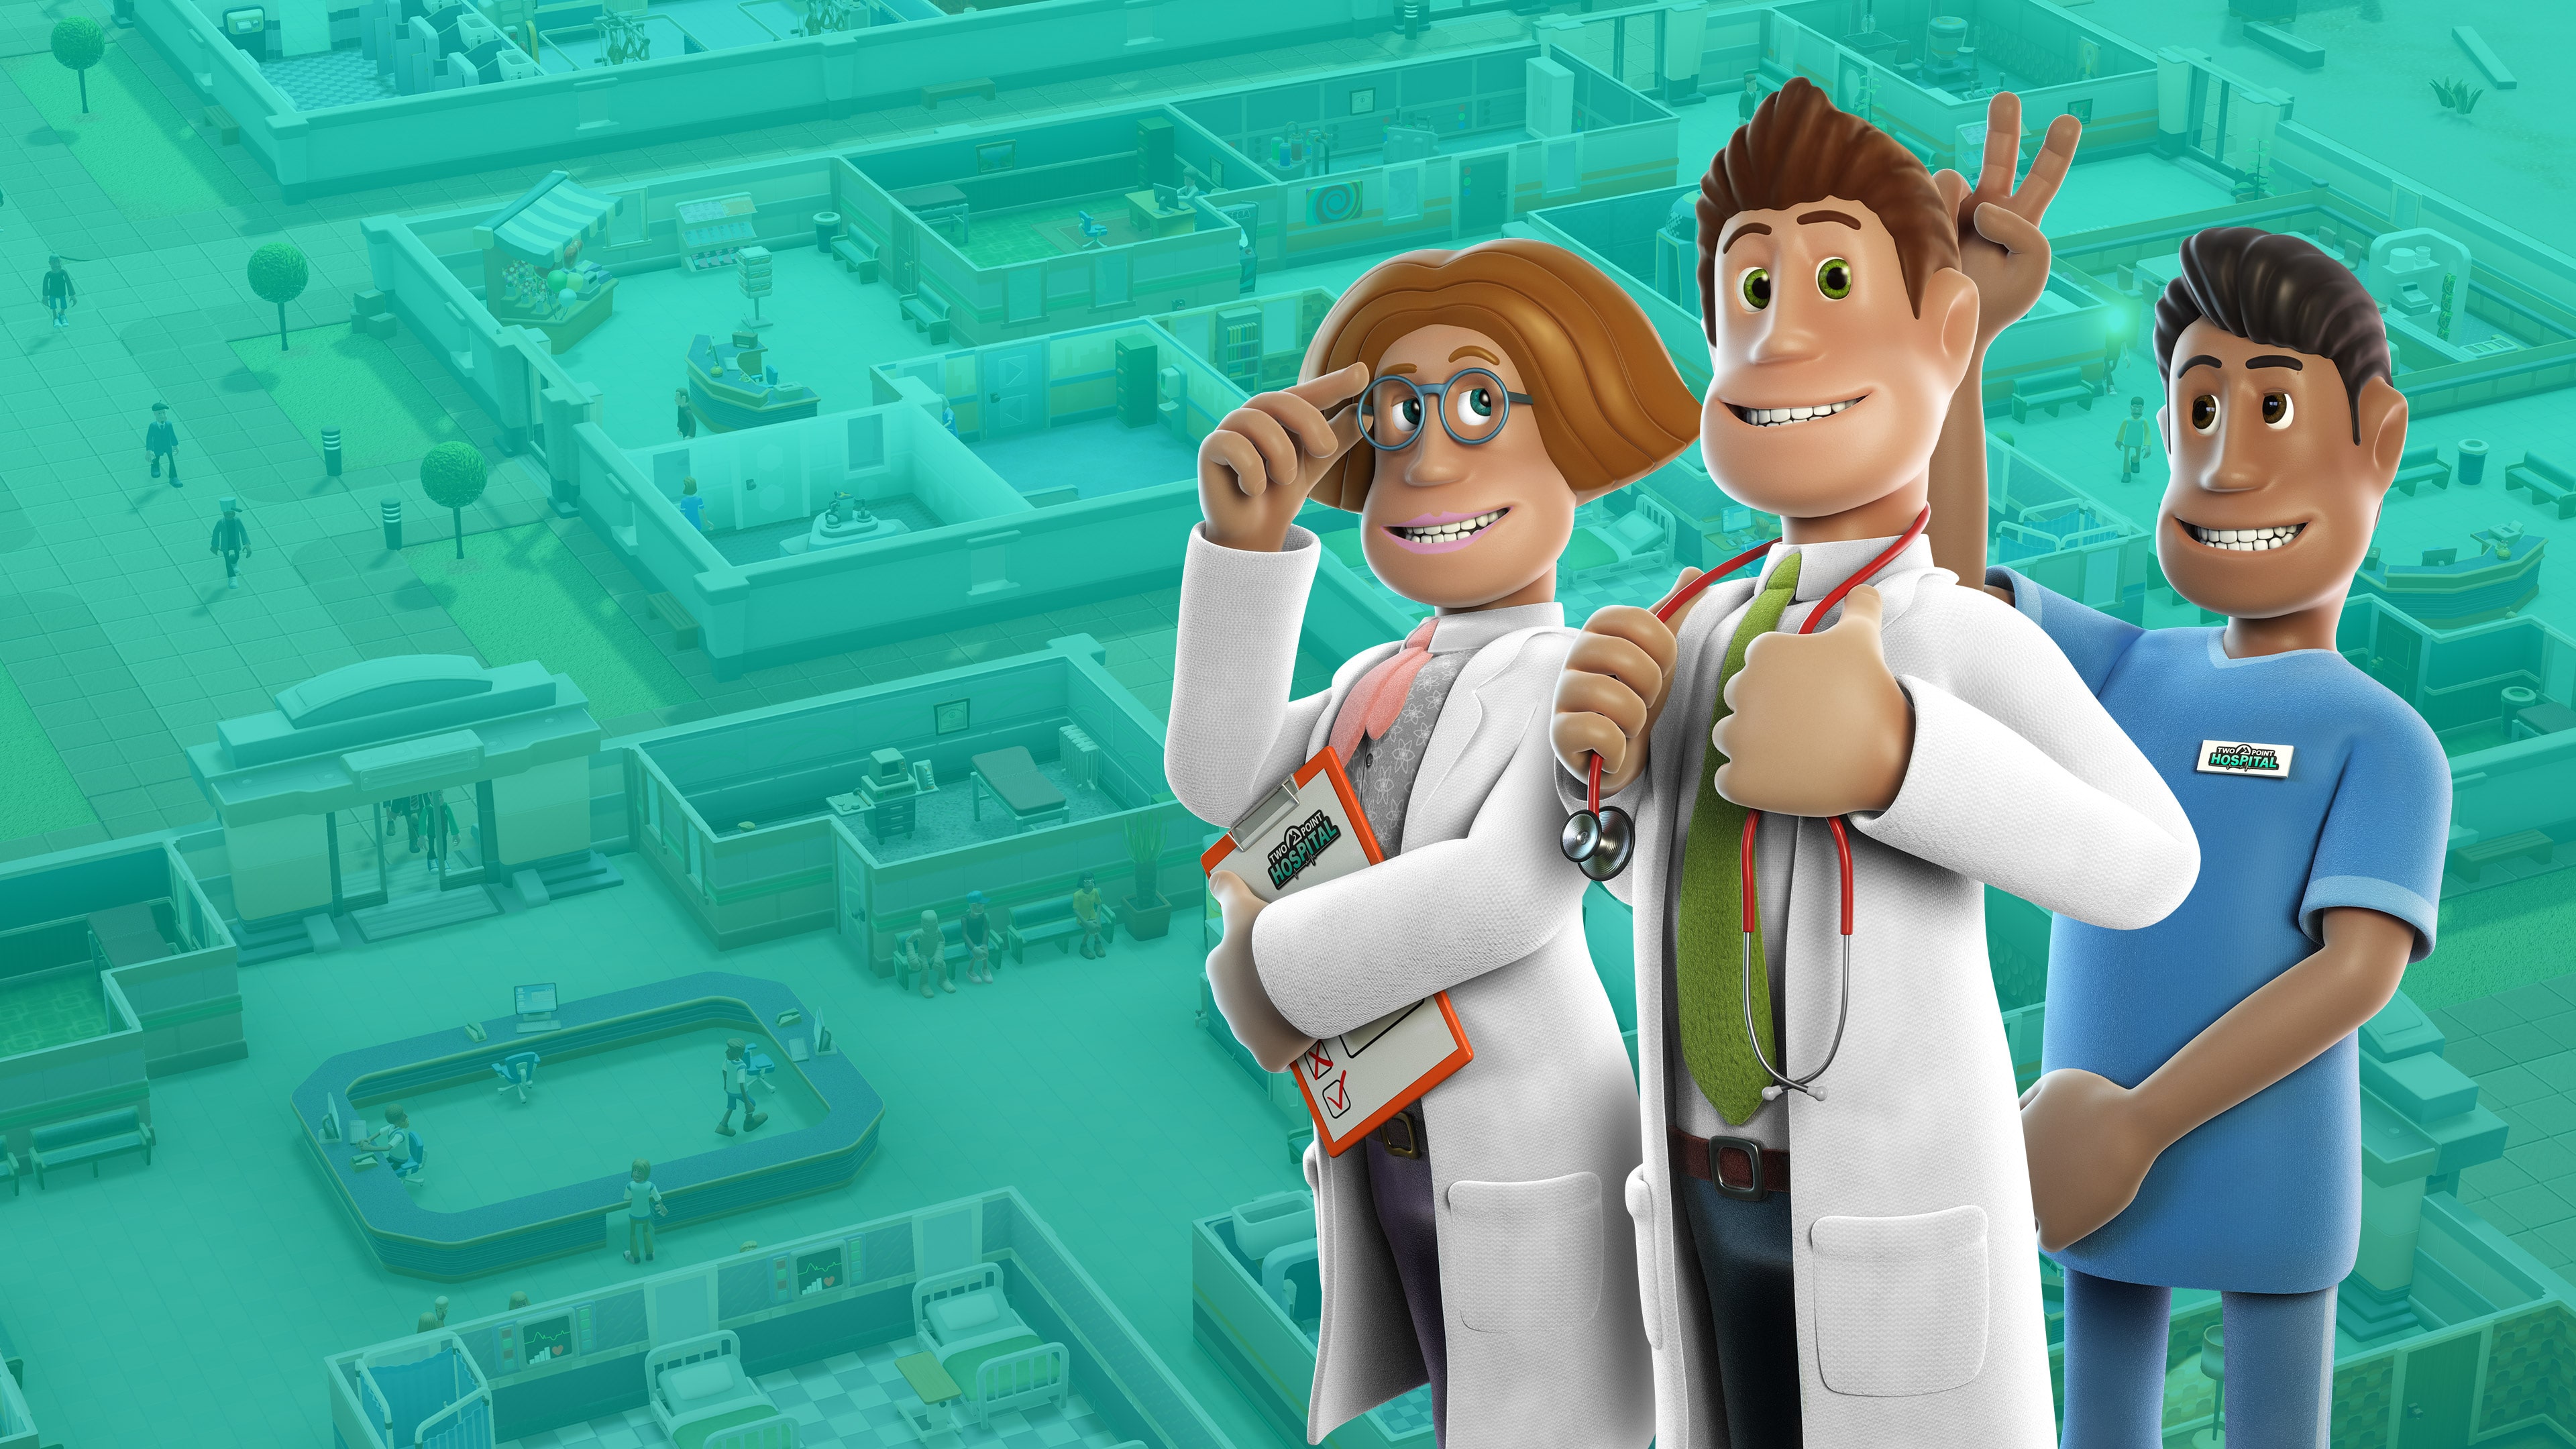 ps4 store two point hospital